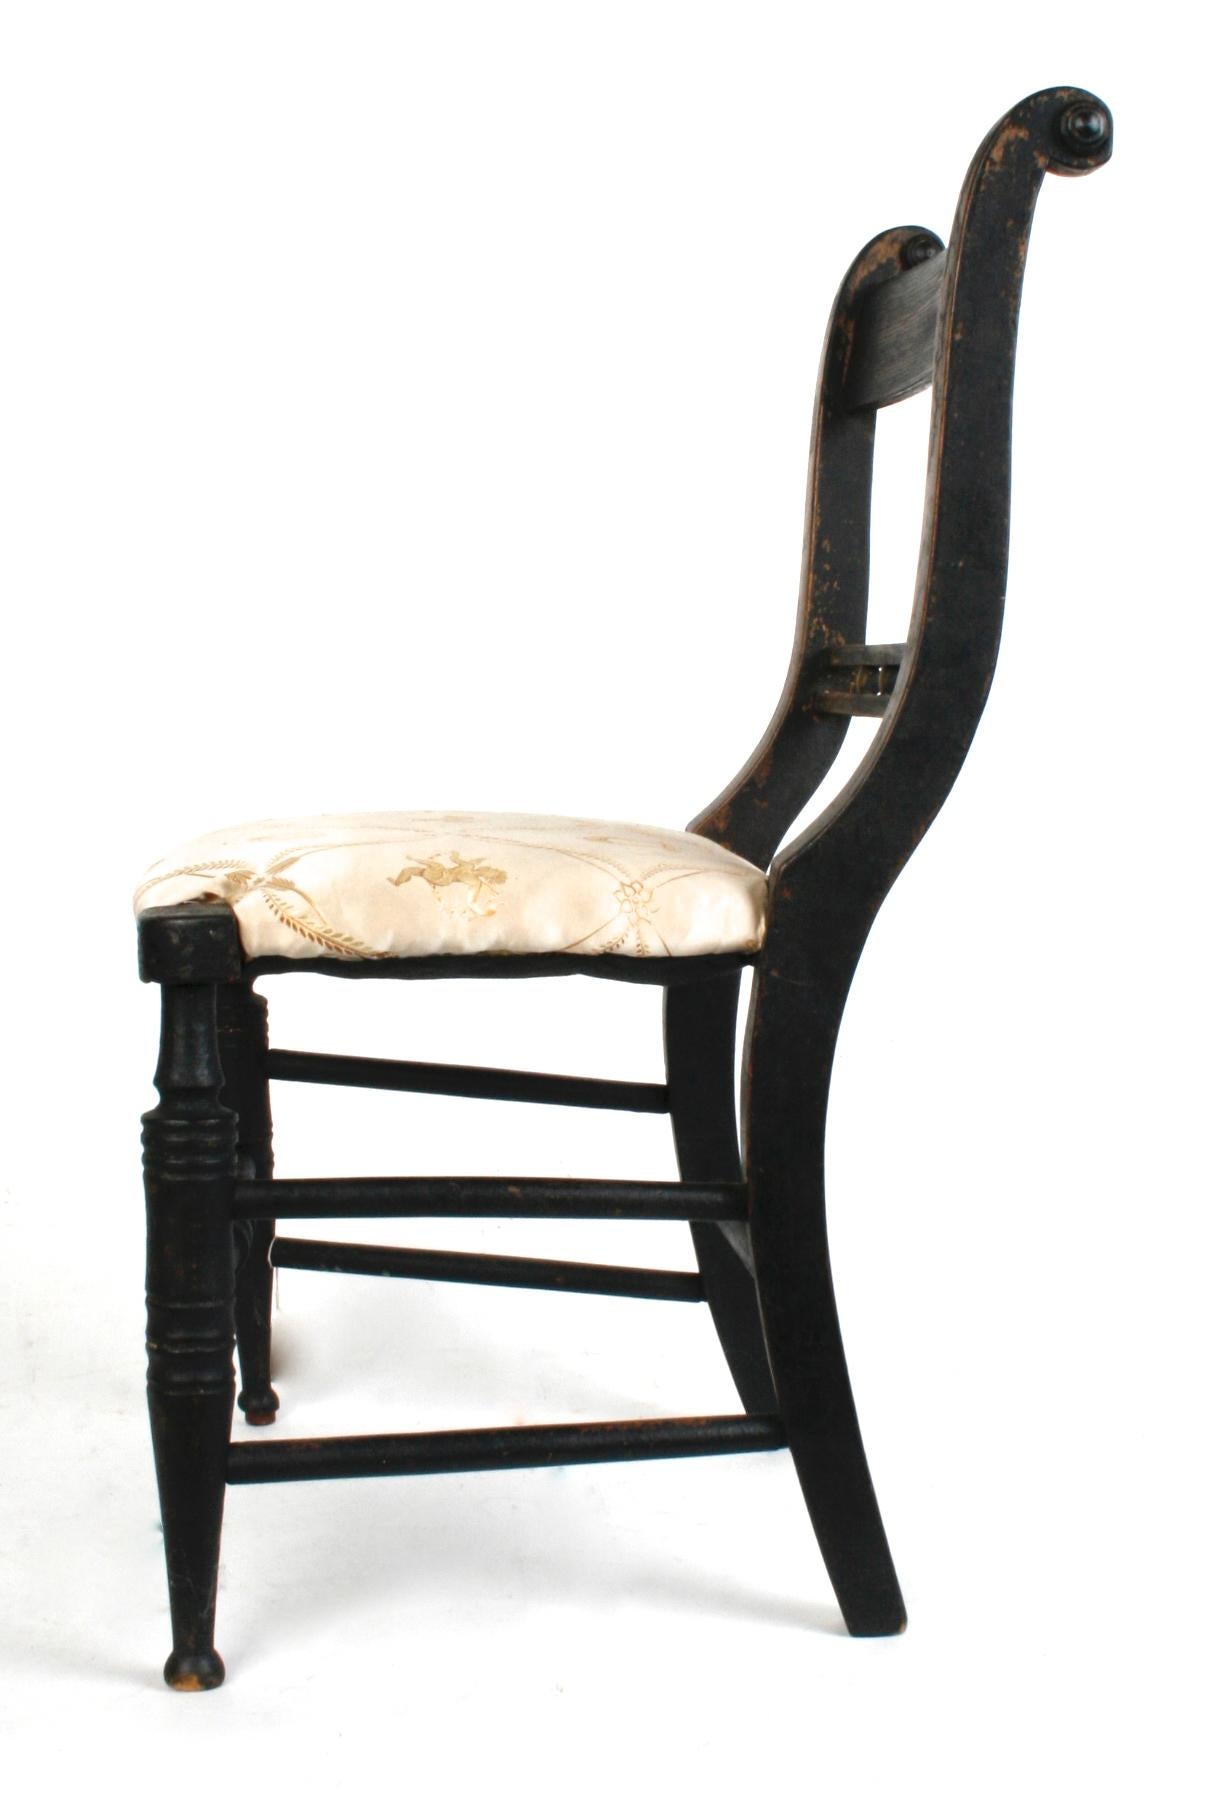 Black painted American Empire child's chair with upholstered seat, turned front legs and front stretcher. The back has a decorative double cross rail separated with five round wooden spacers. The chairs curved styles end in scrolls and turned caps.